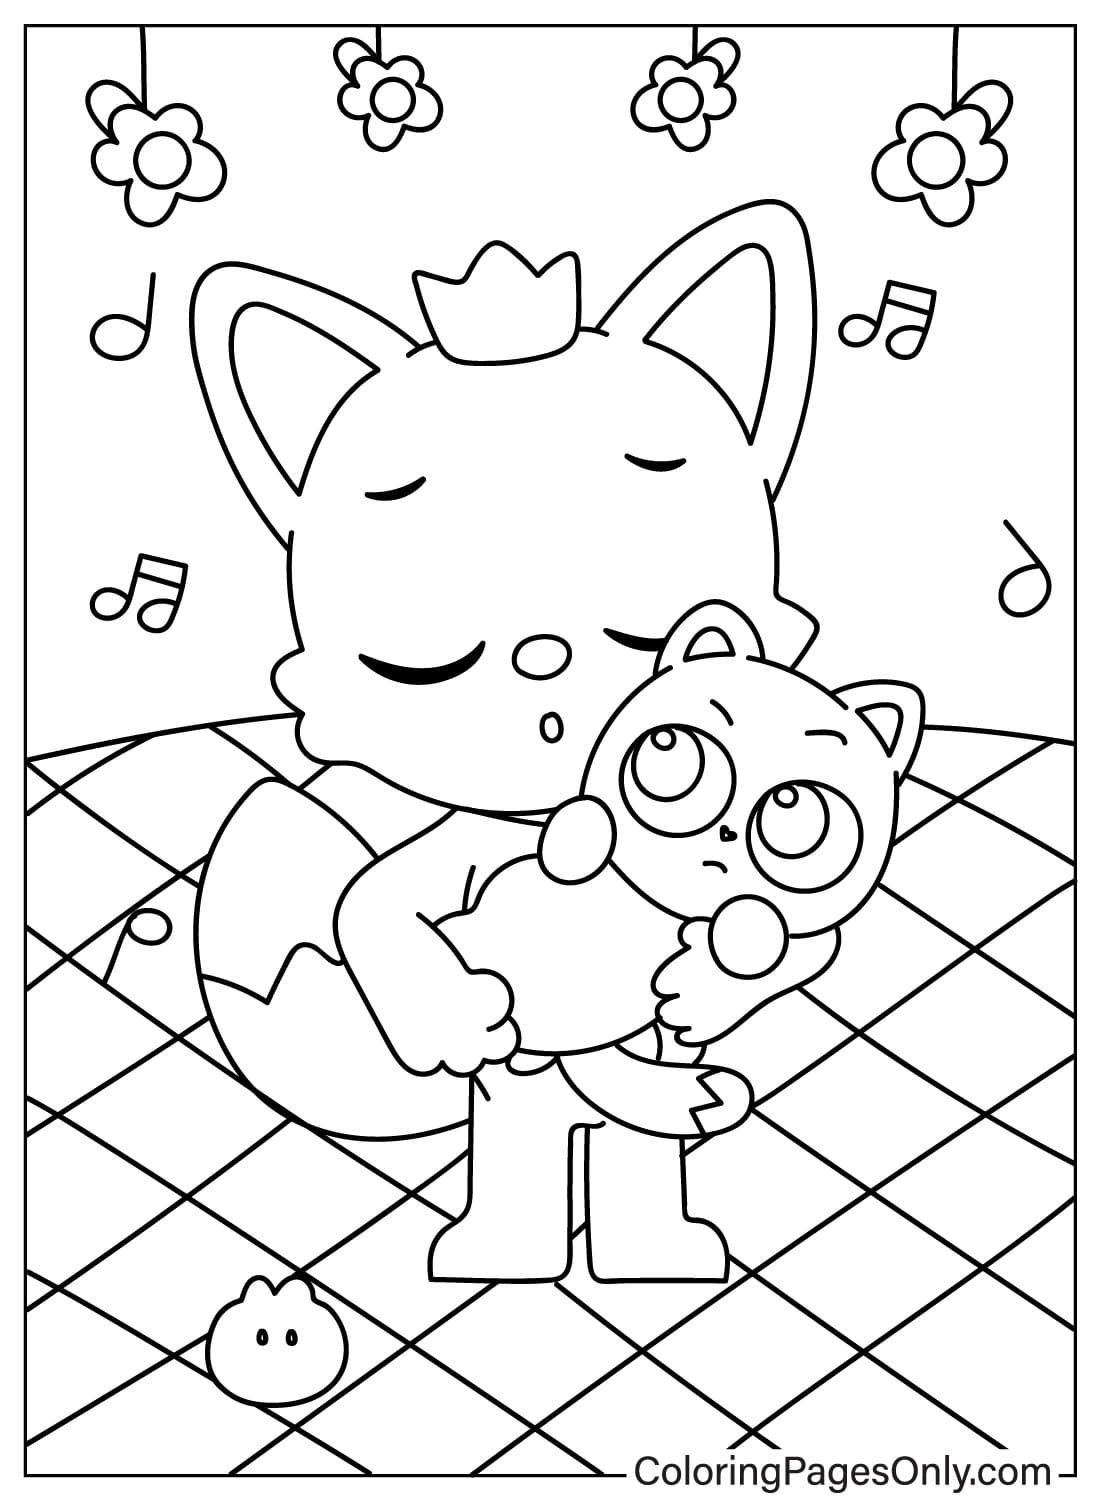 Pinkfong and Ninimo from Pinkfong